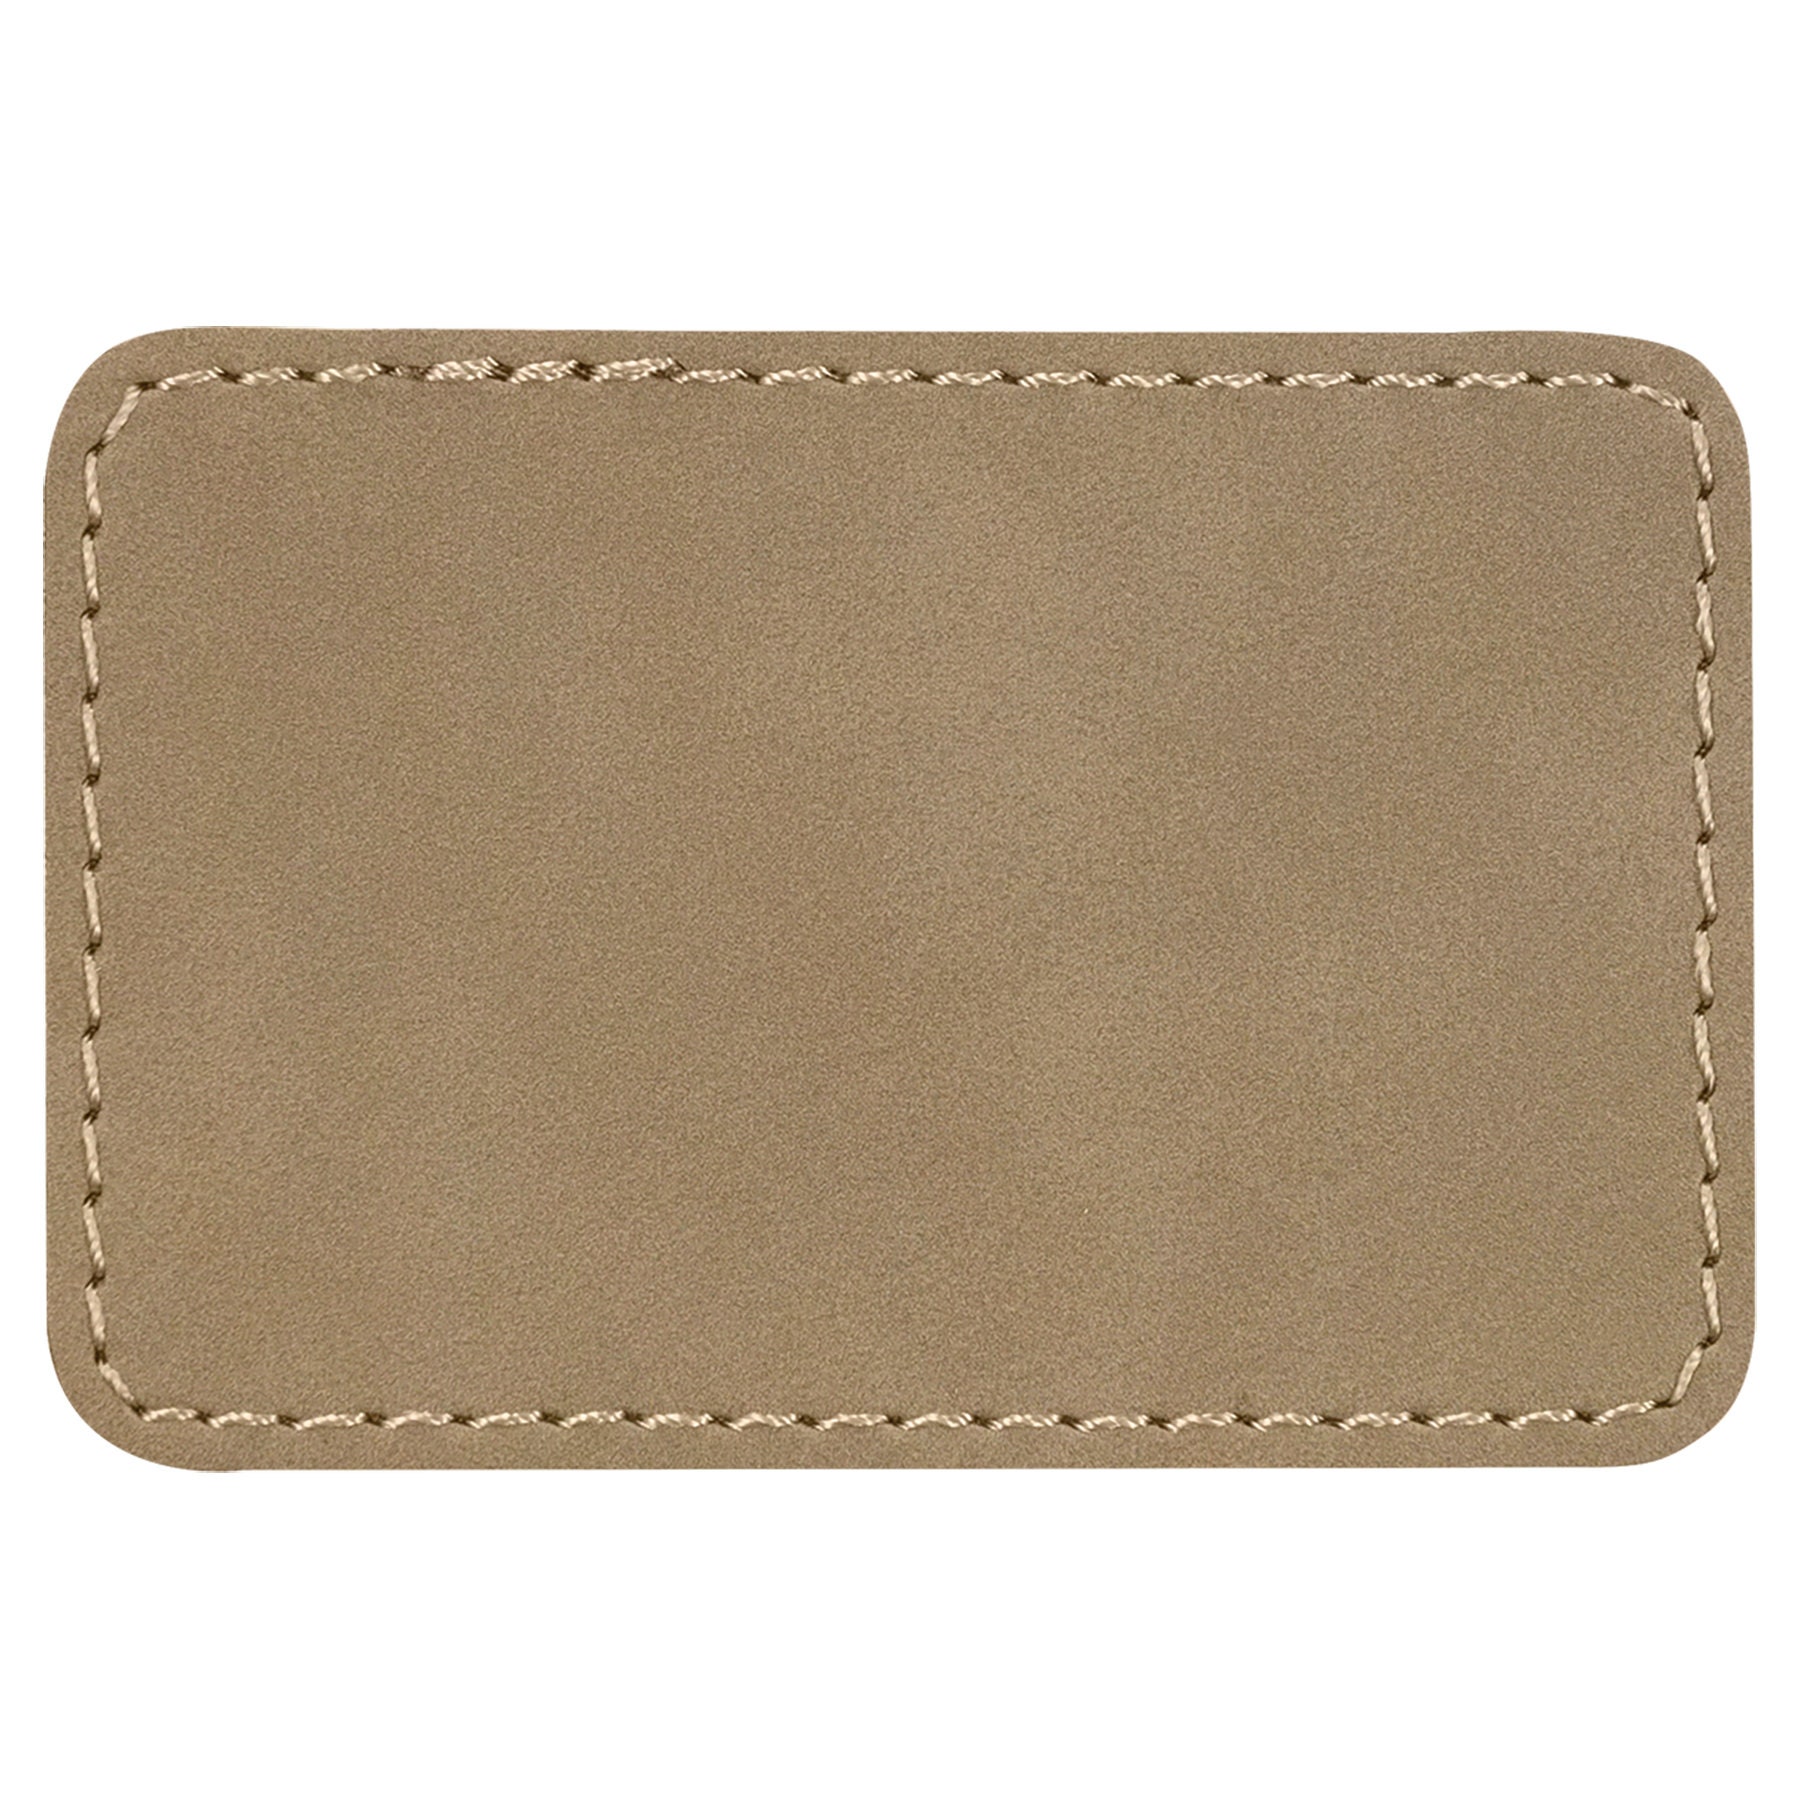 3x2 Blank Leatherette Oval Patches w/ Adhesive Backing